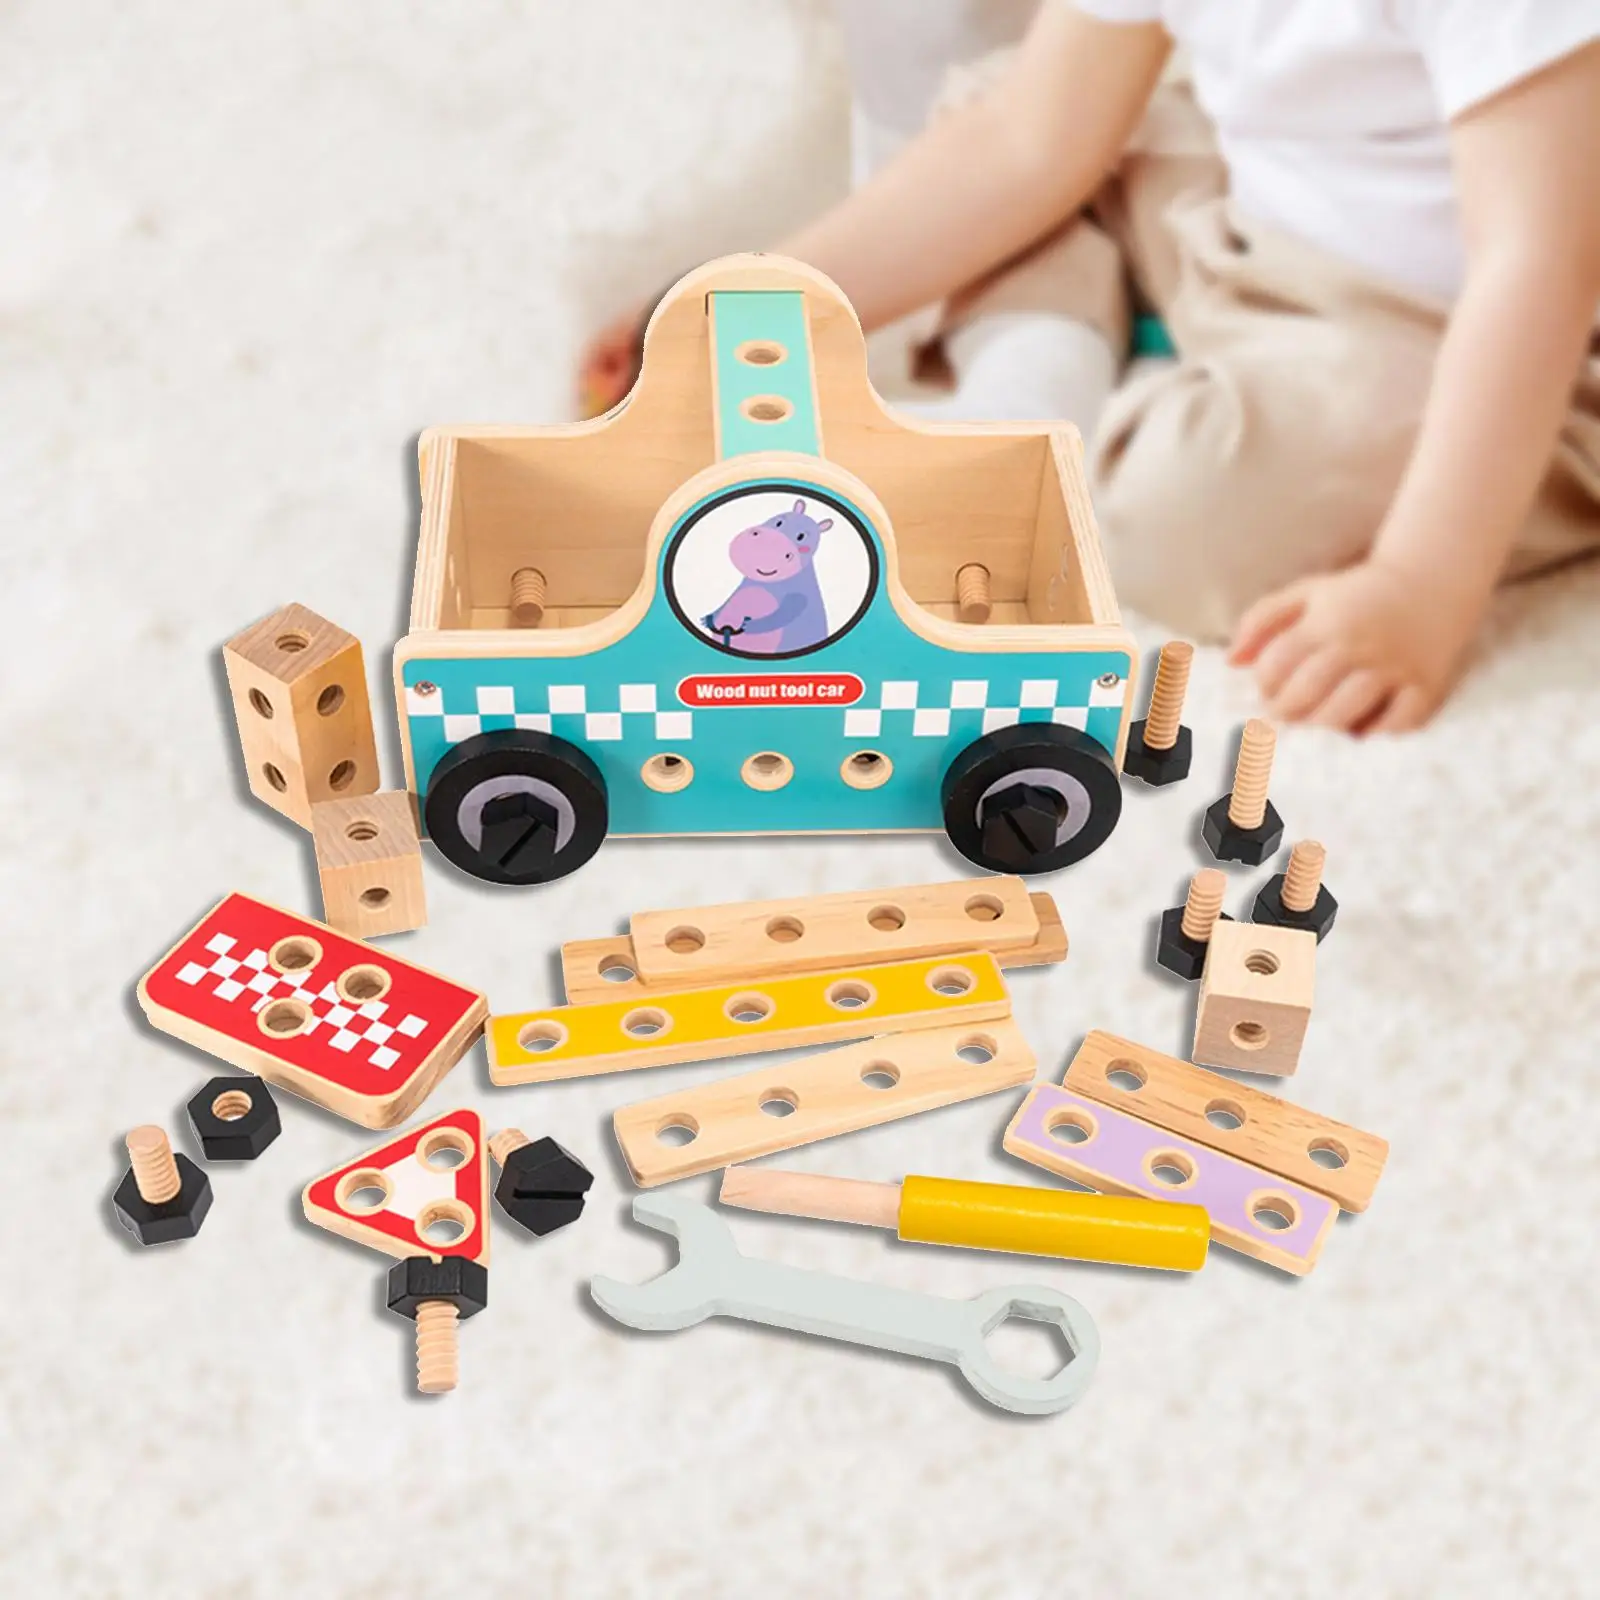 Wooden Tool Toy Assembly Set Play Accessories Montessori Wooden Tool Basket Toy for Ages 3-6 Children Kids Toddler Boys Girls